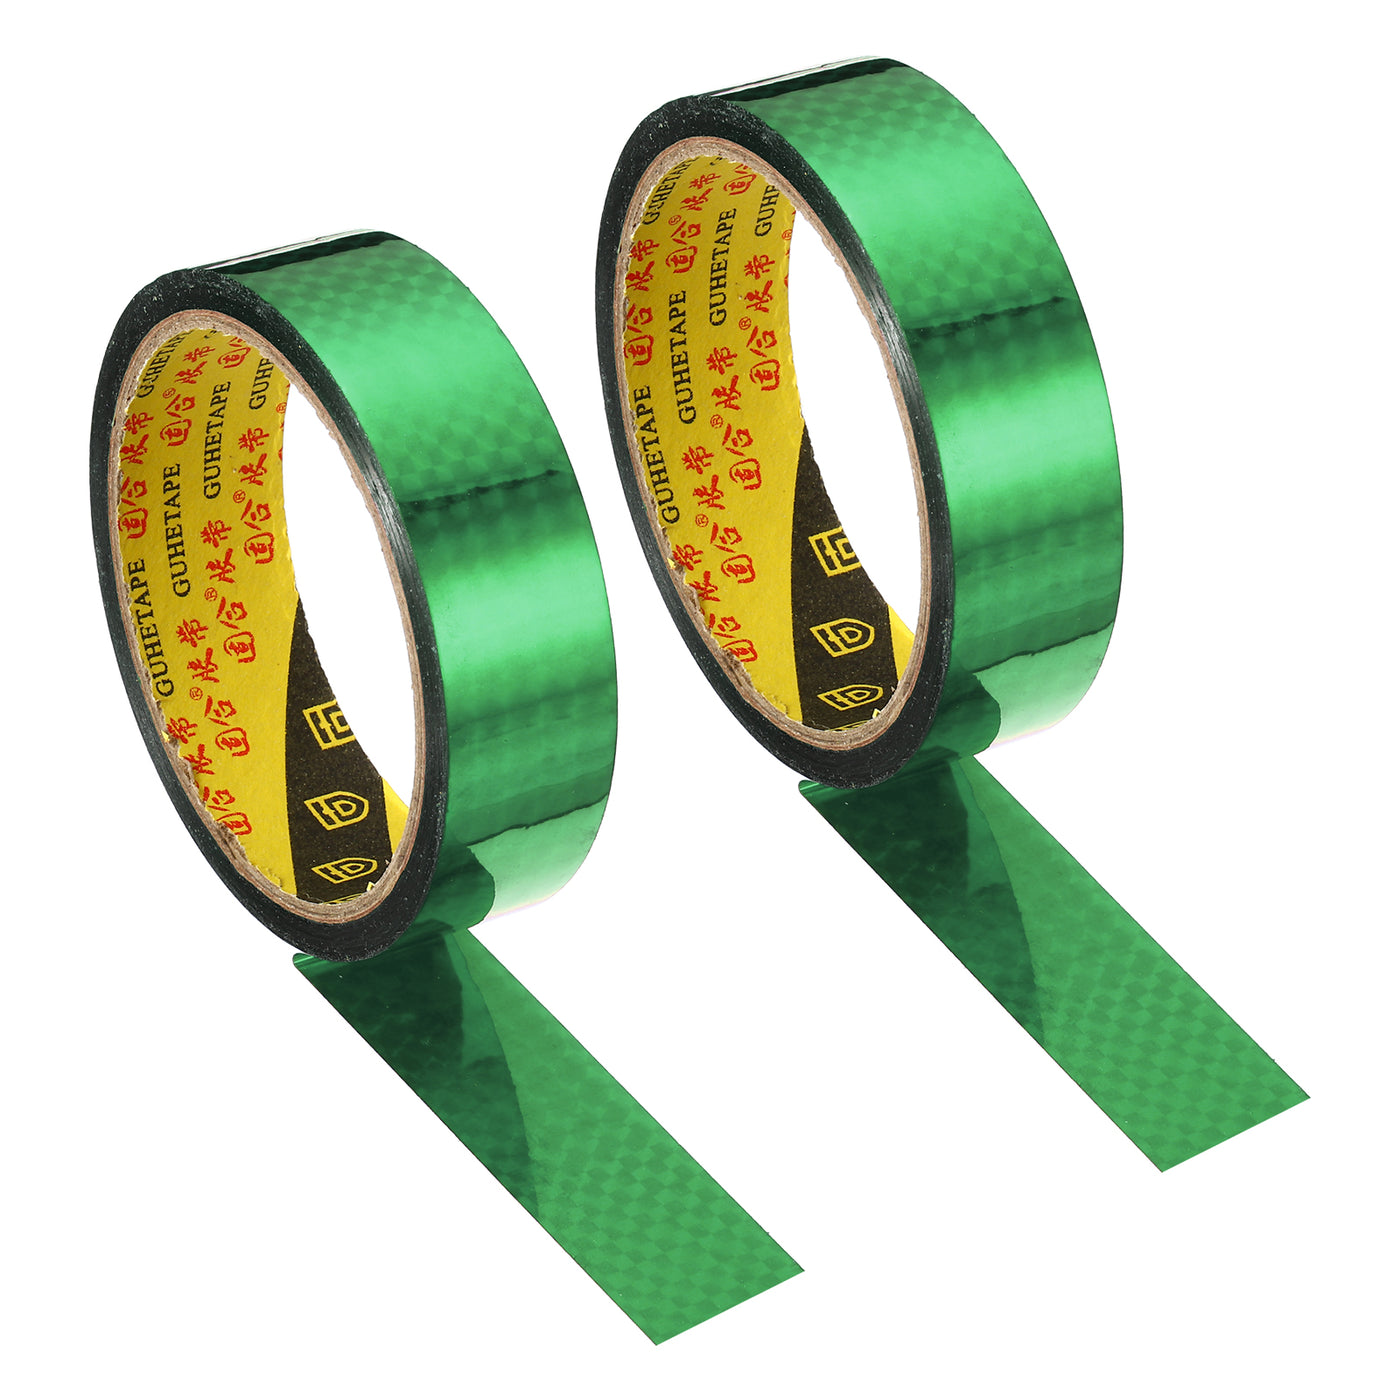 Harfington Prism Tape 25mm x 30m, 2 Pack Holographic Reflective Self Adhesive for DIY Art Craft Wrapping Decoration, Green